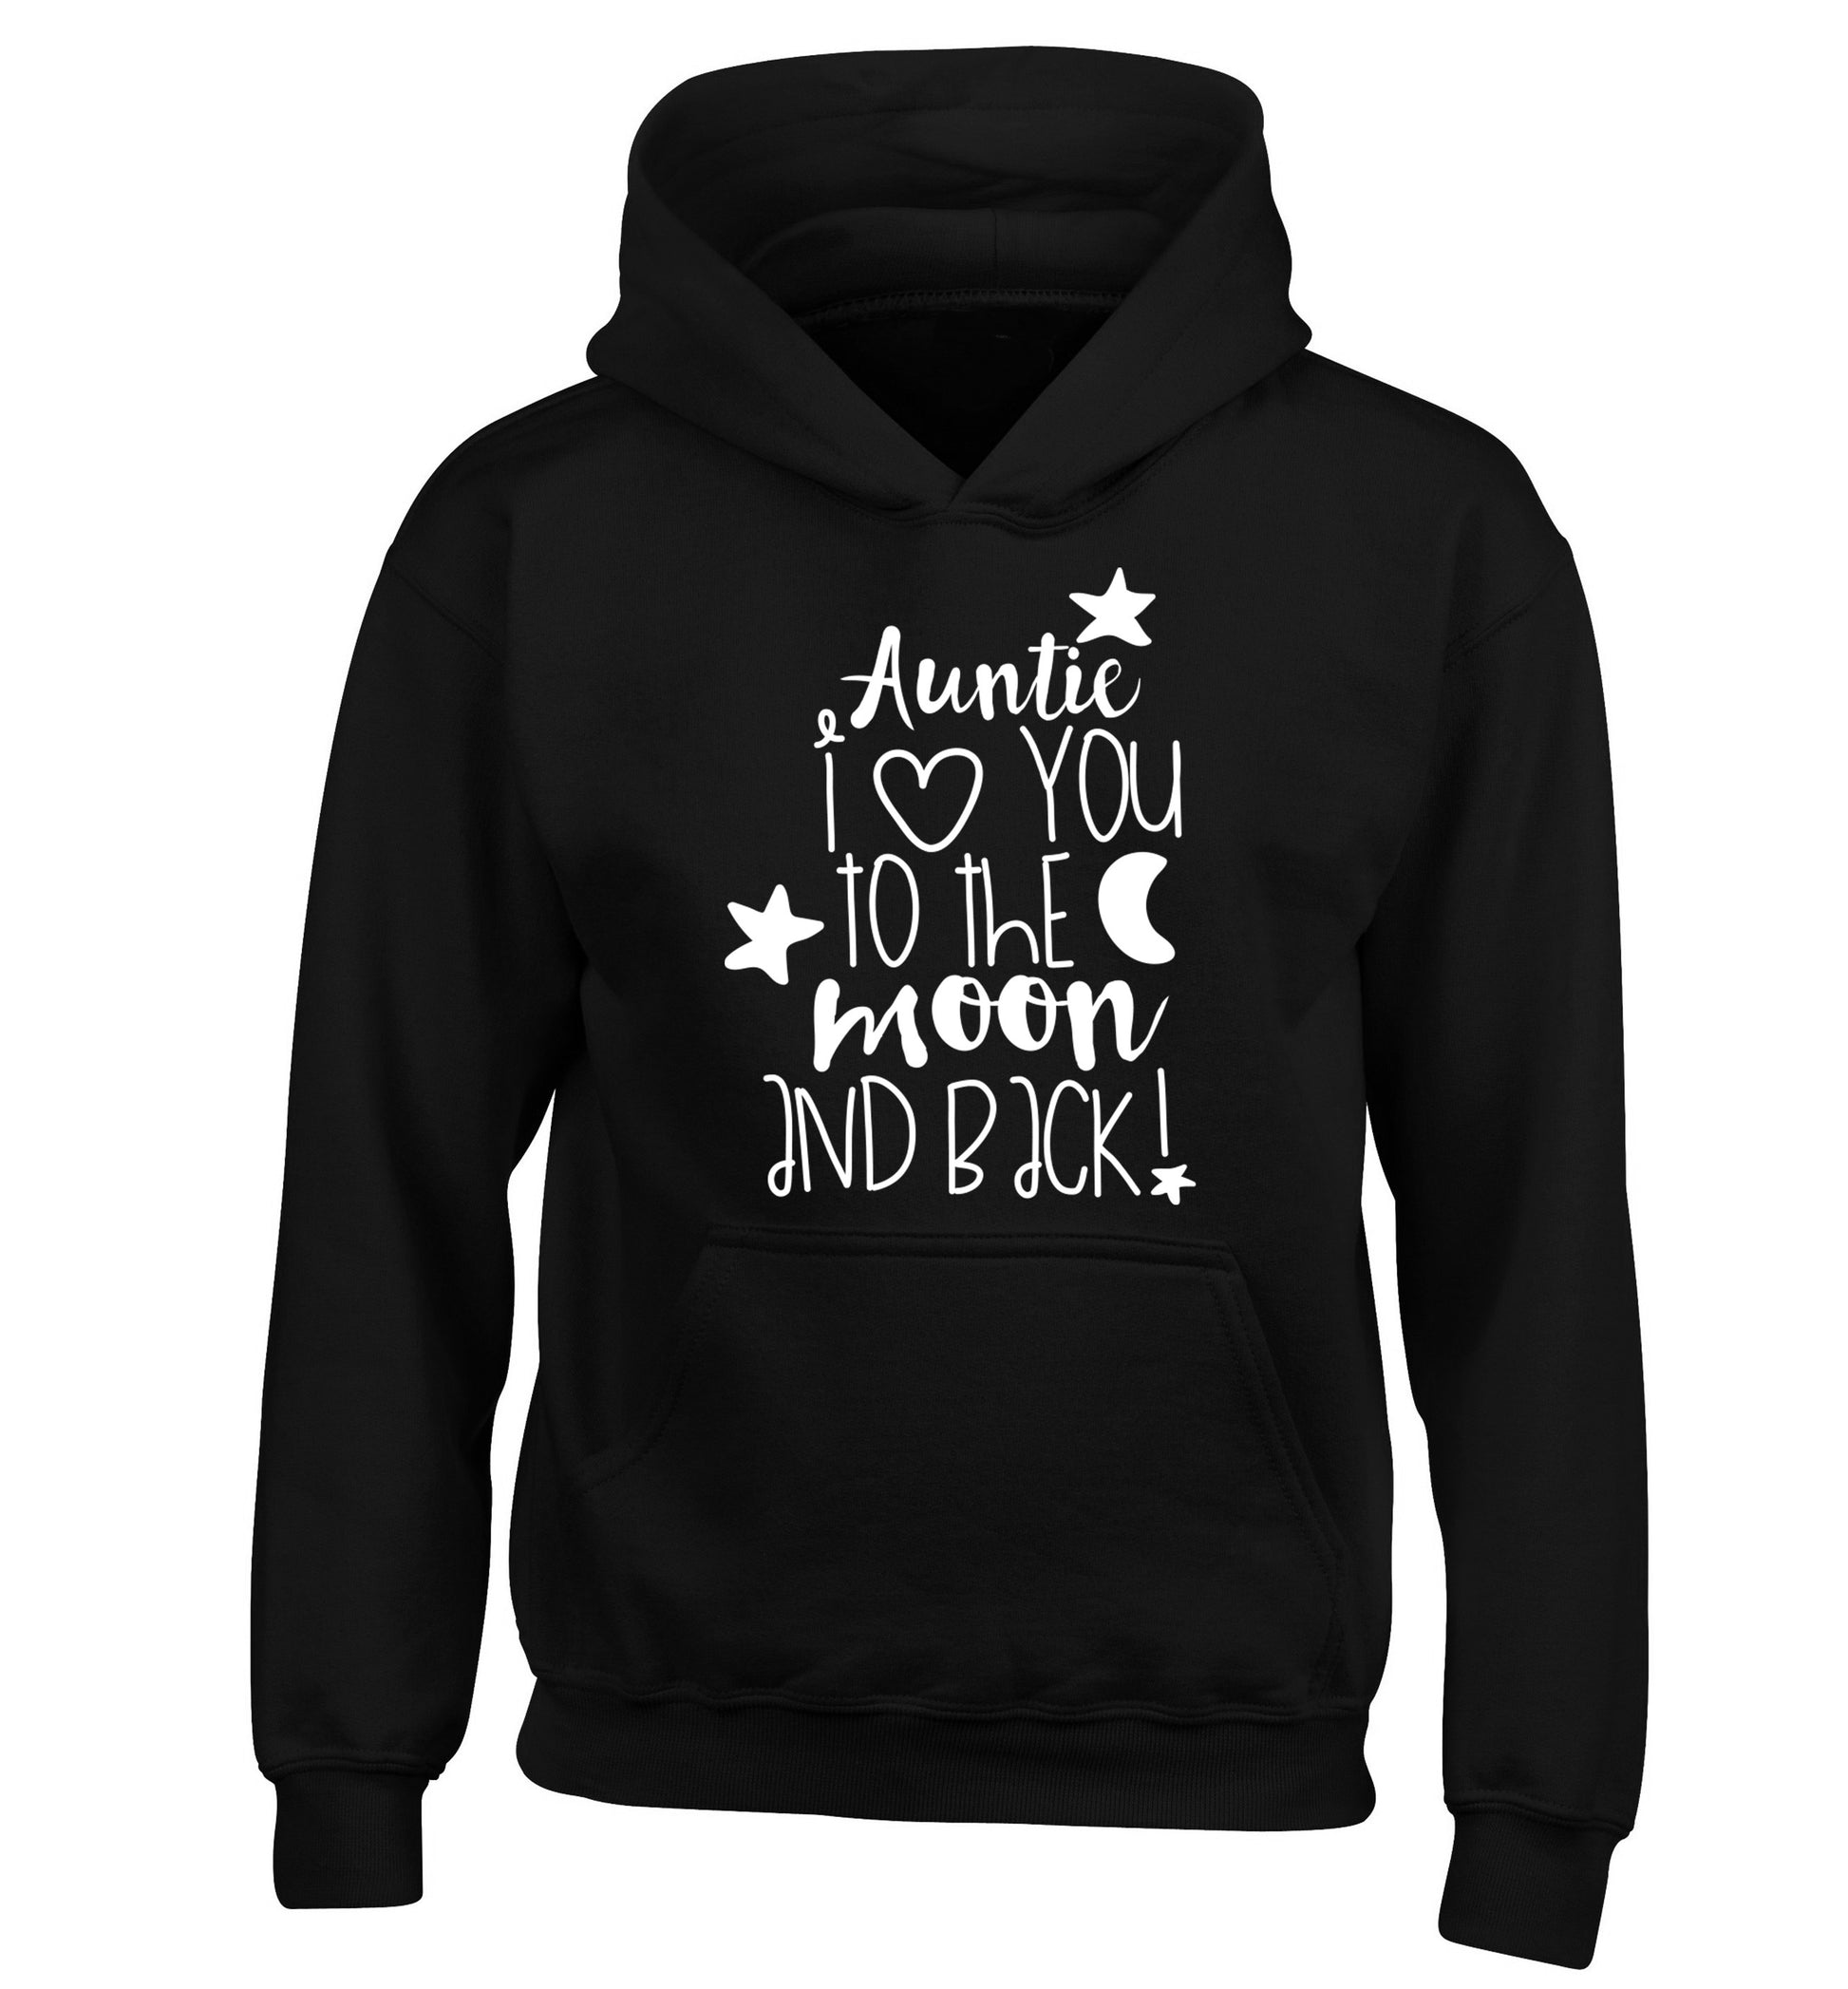 Auntie I love you to the moon and back children's black hoodie 12-14 Years